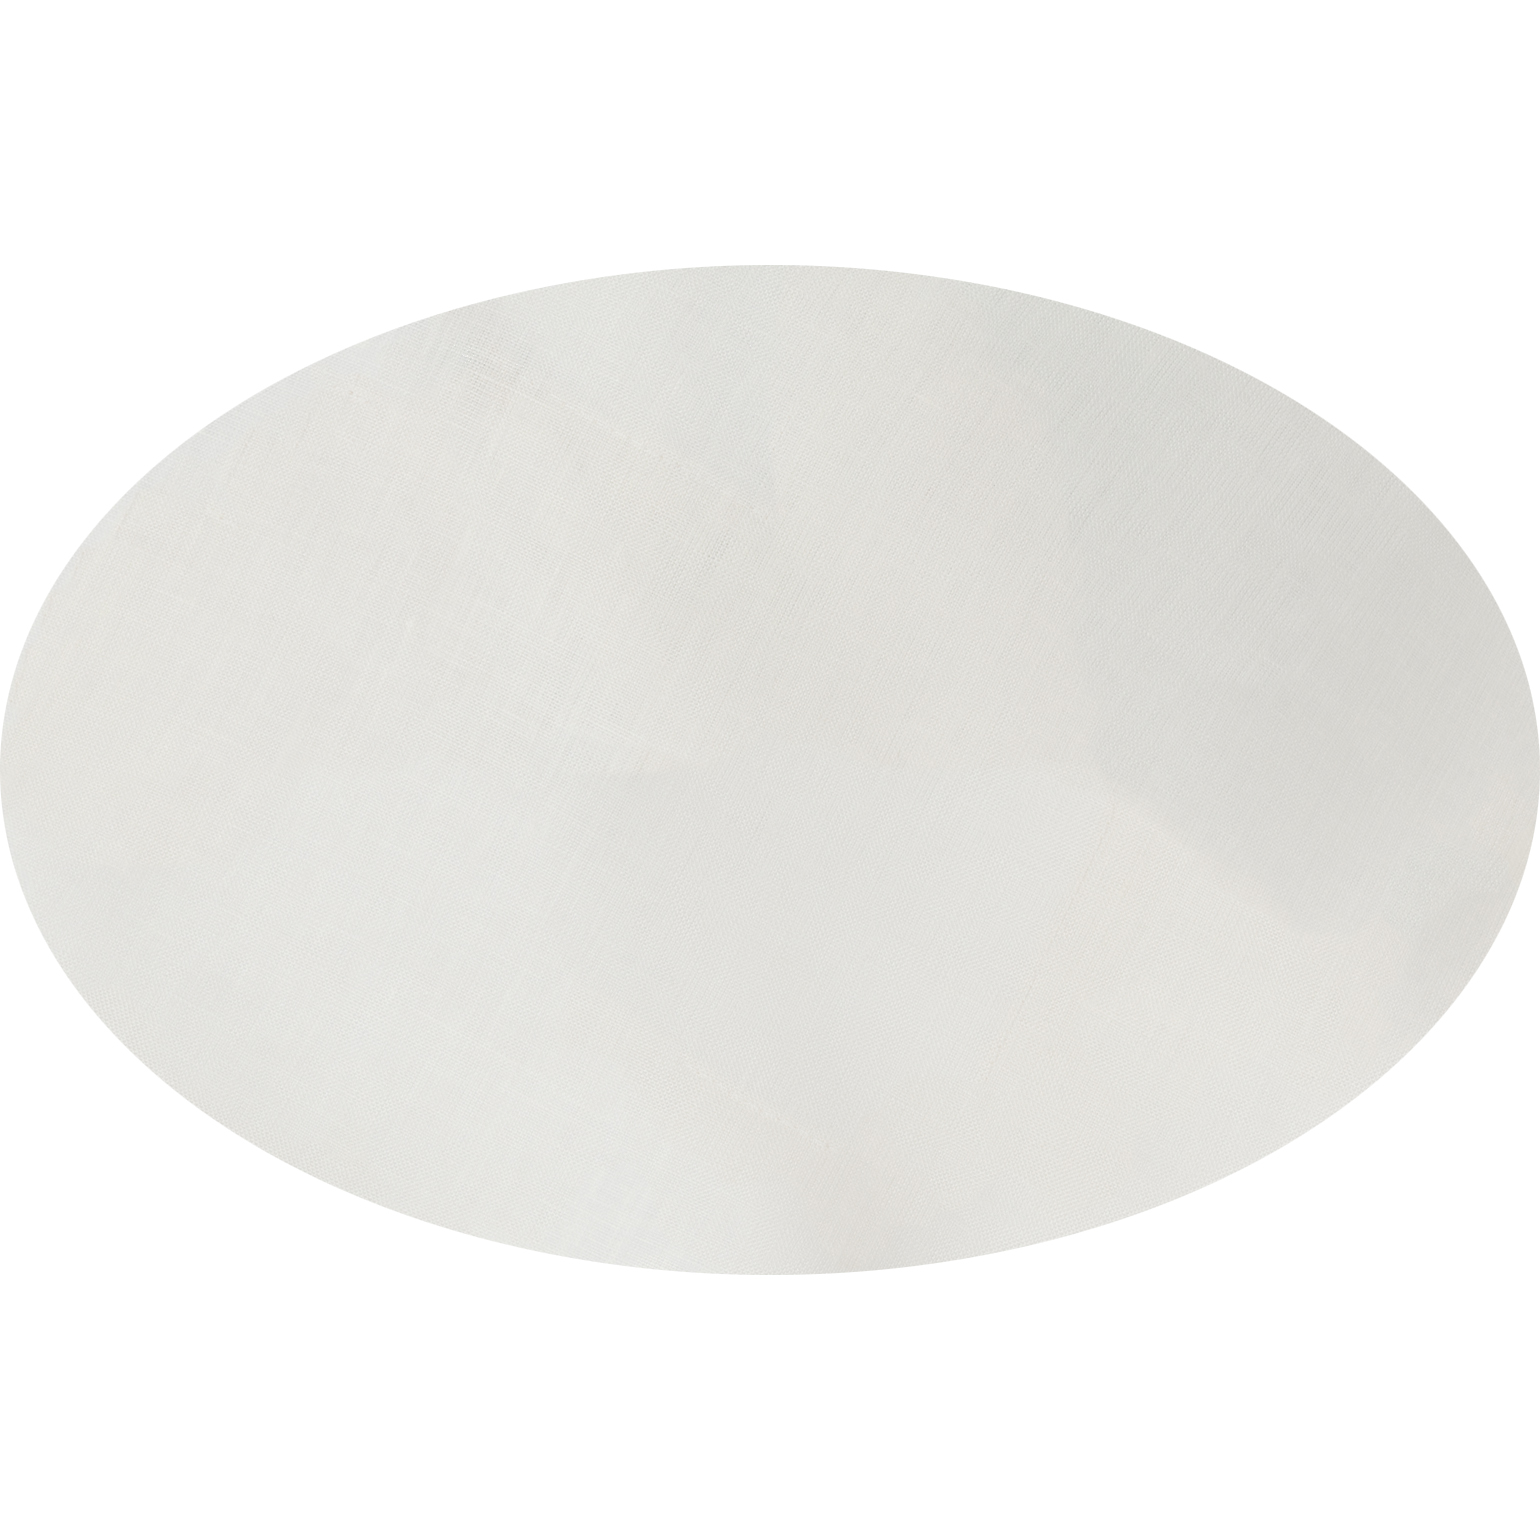 Ivory Oval Linen Tablecloth - $195